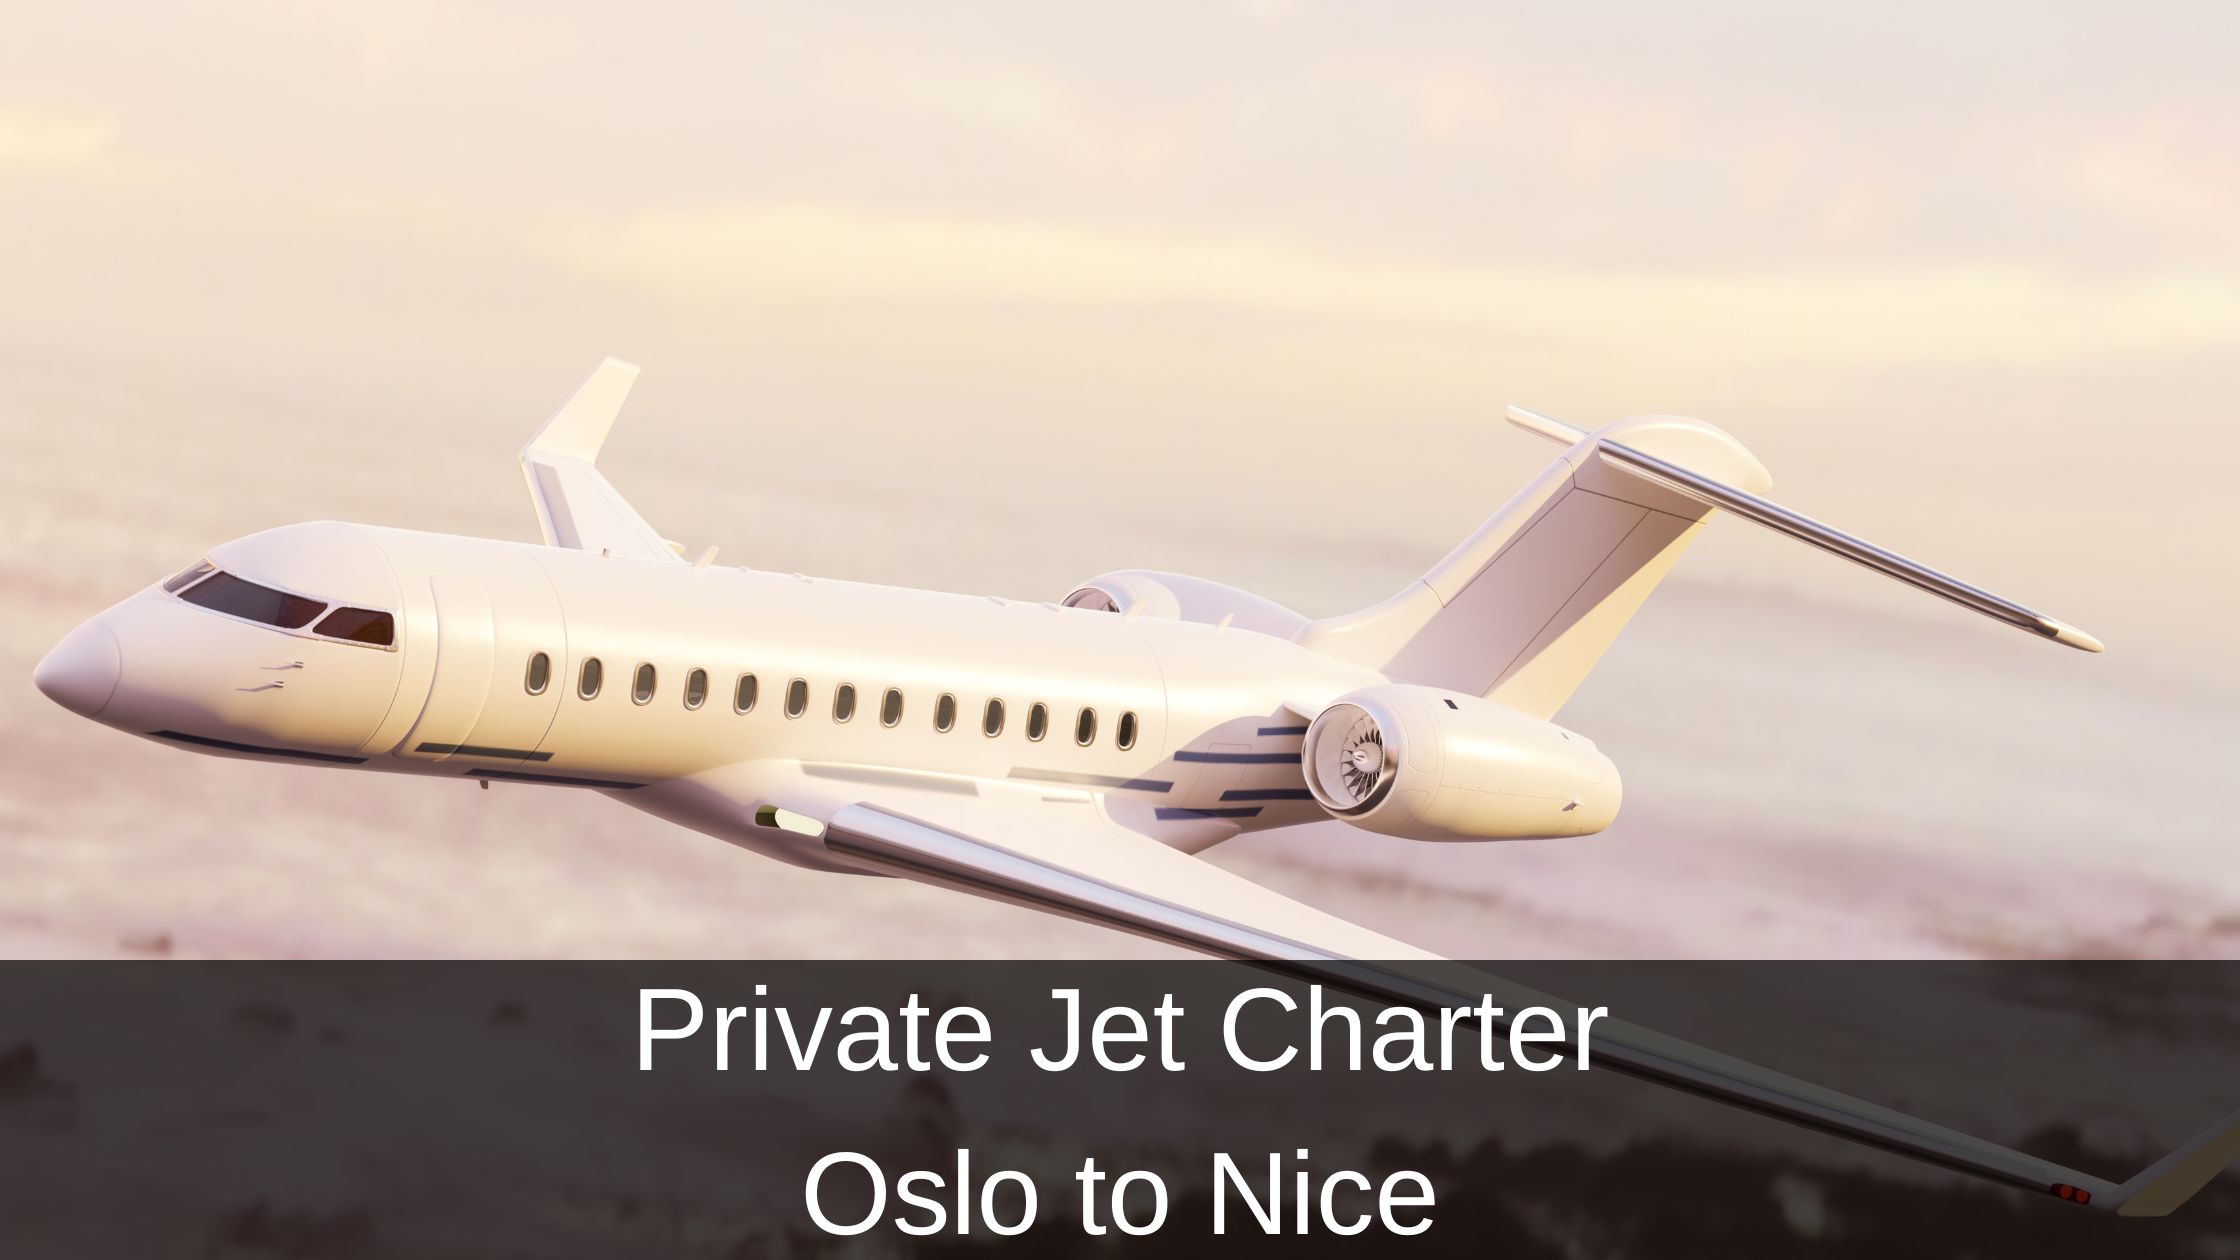 Private Jet Charter from Oslo to Nice